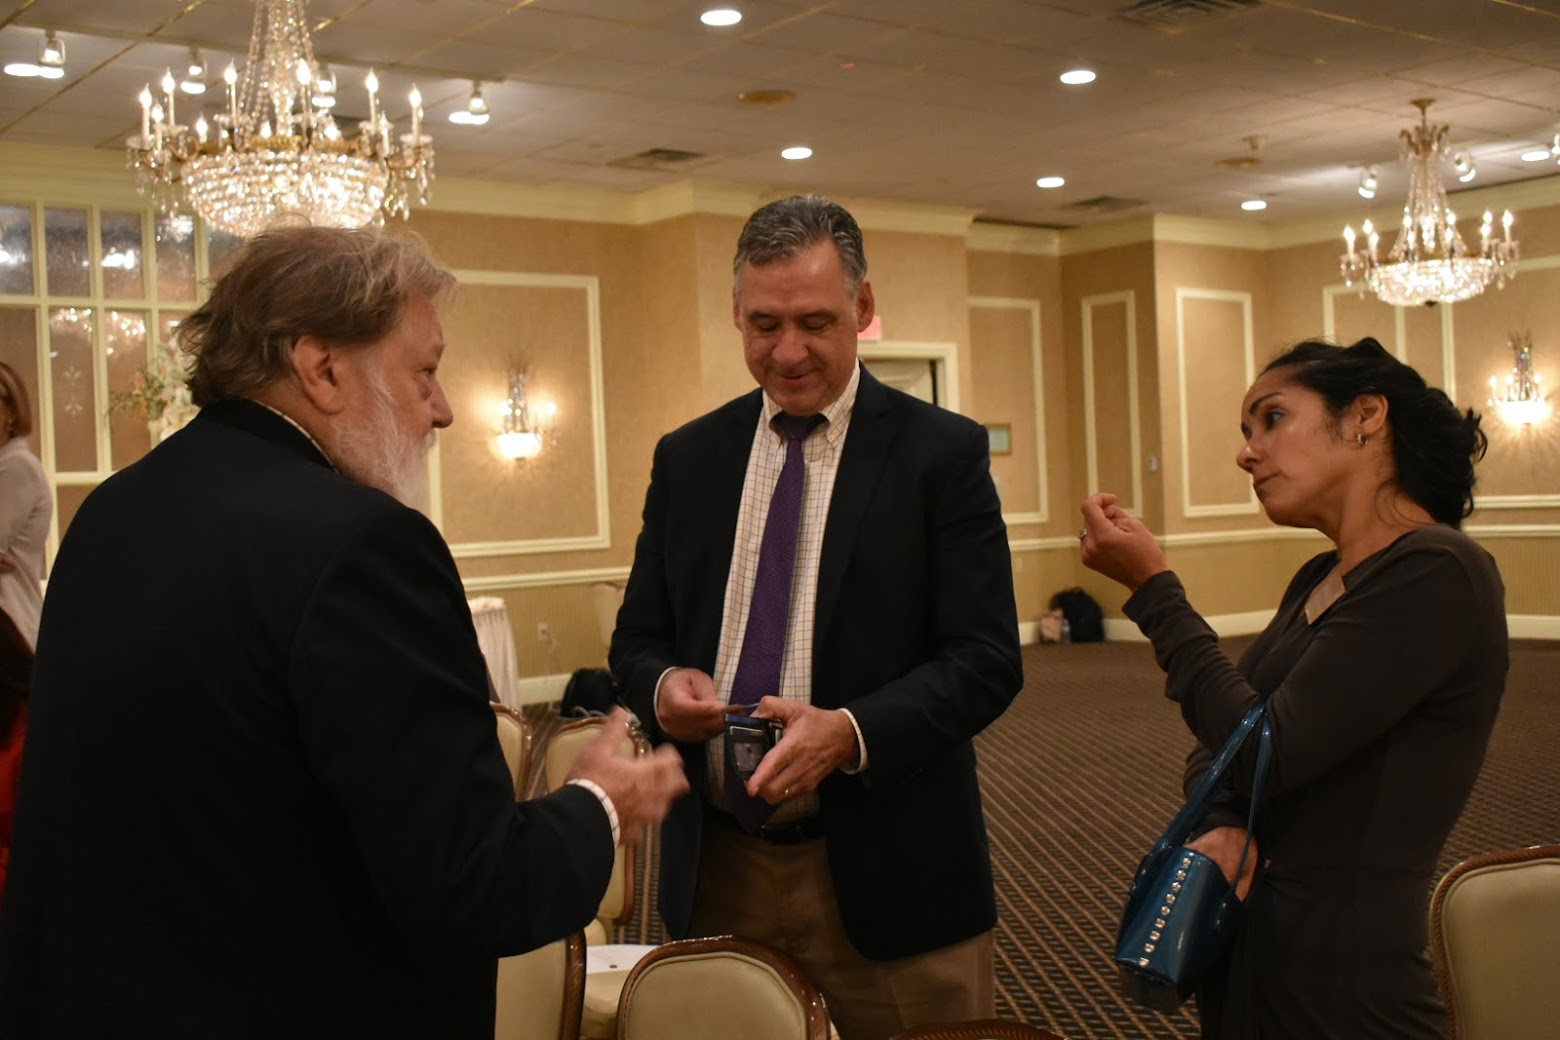 Small business owners speak to Advocacy staff after roundtable in Poughkeepsie, New York